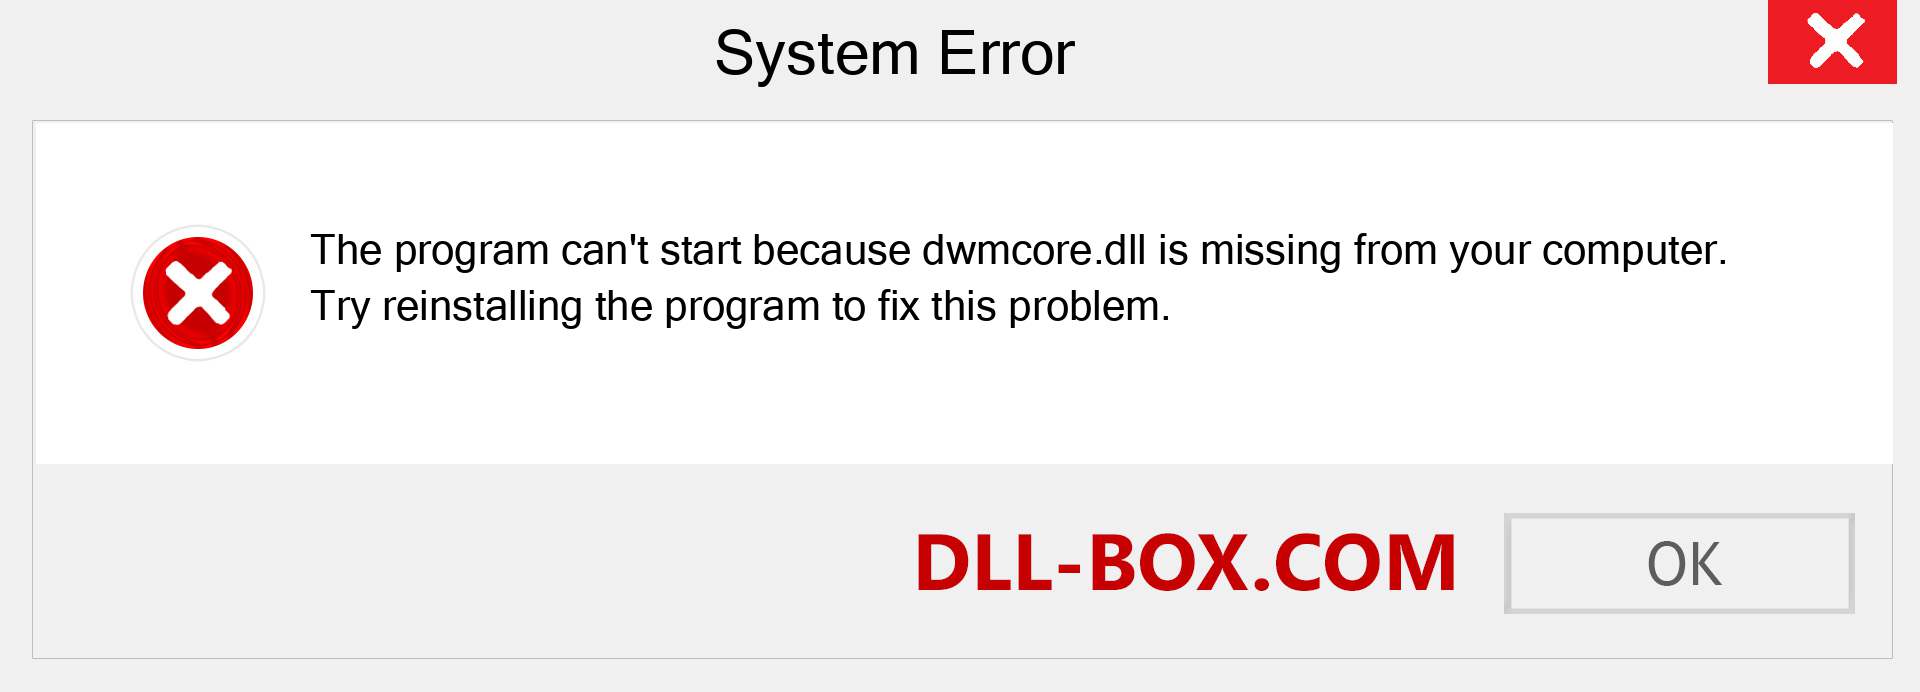  dwmcore.dll file is missing?. Download for Windows 7, 8, 10 - Fix  dwmcore dll Missing Error on Windows, photos, images